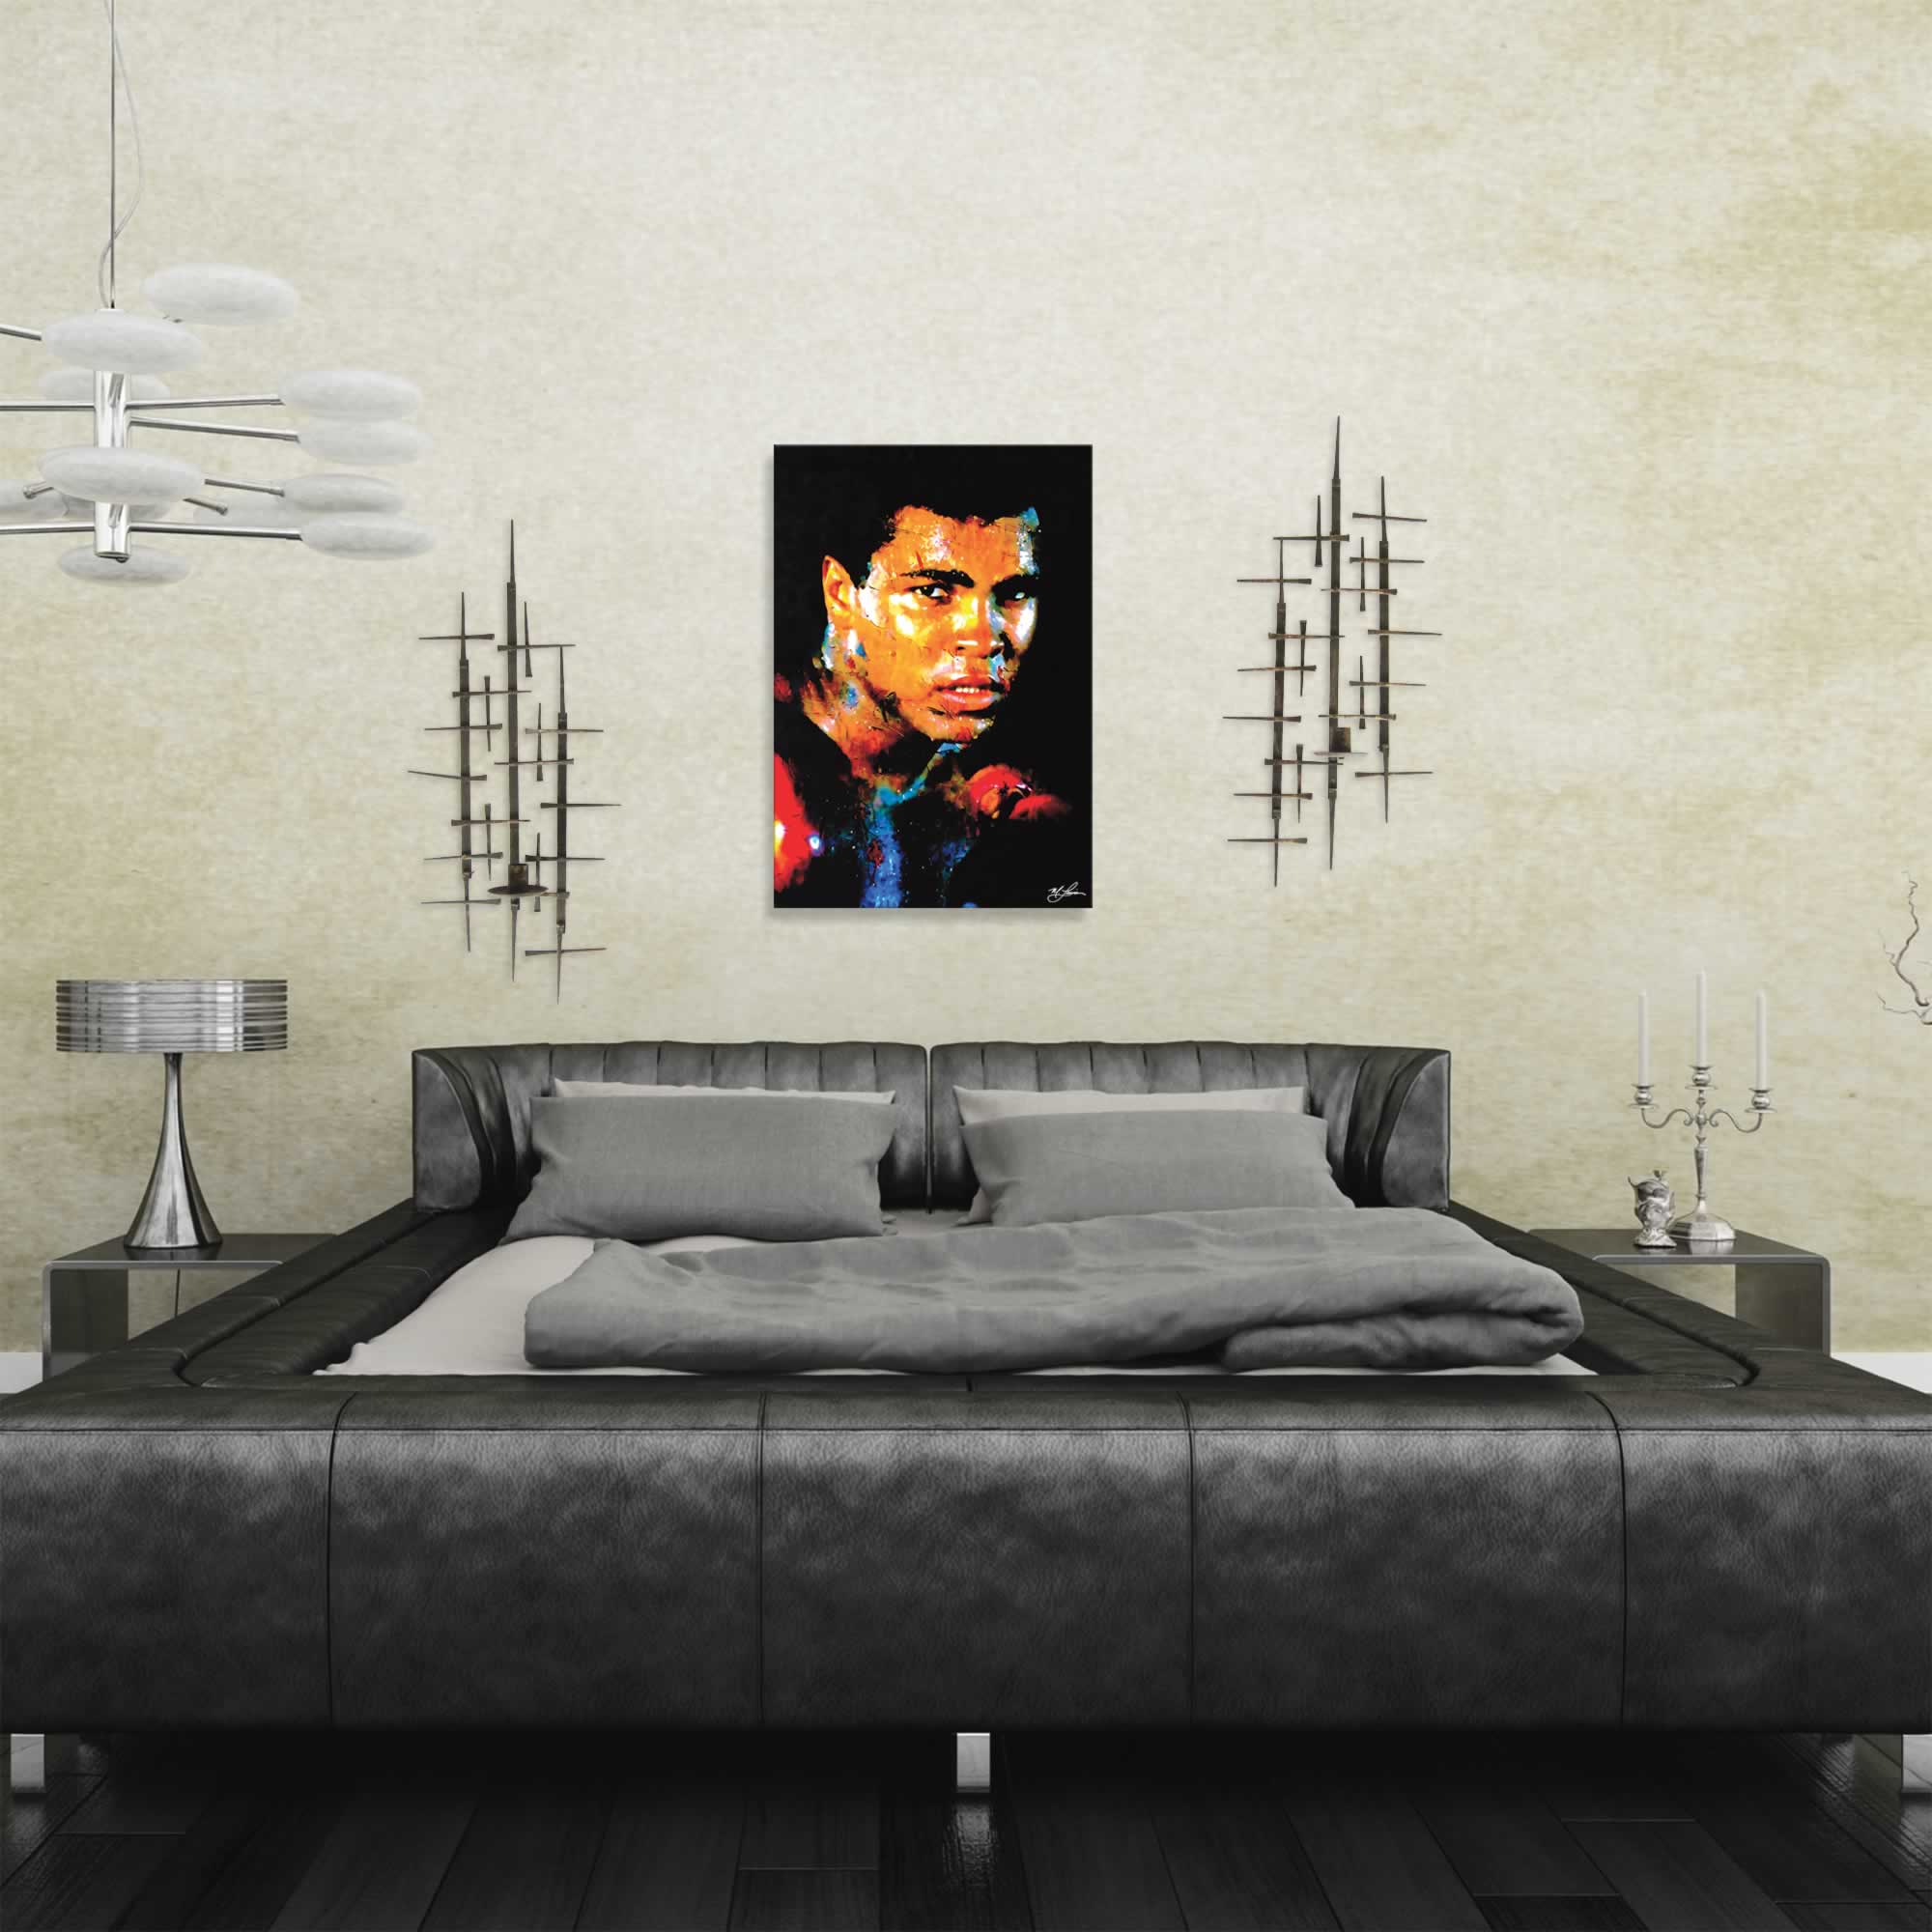 Muhammad Ali Affirmation Realized by Mark Lewis - Contemporary Pop Art on Metal - Lifestyle View